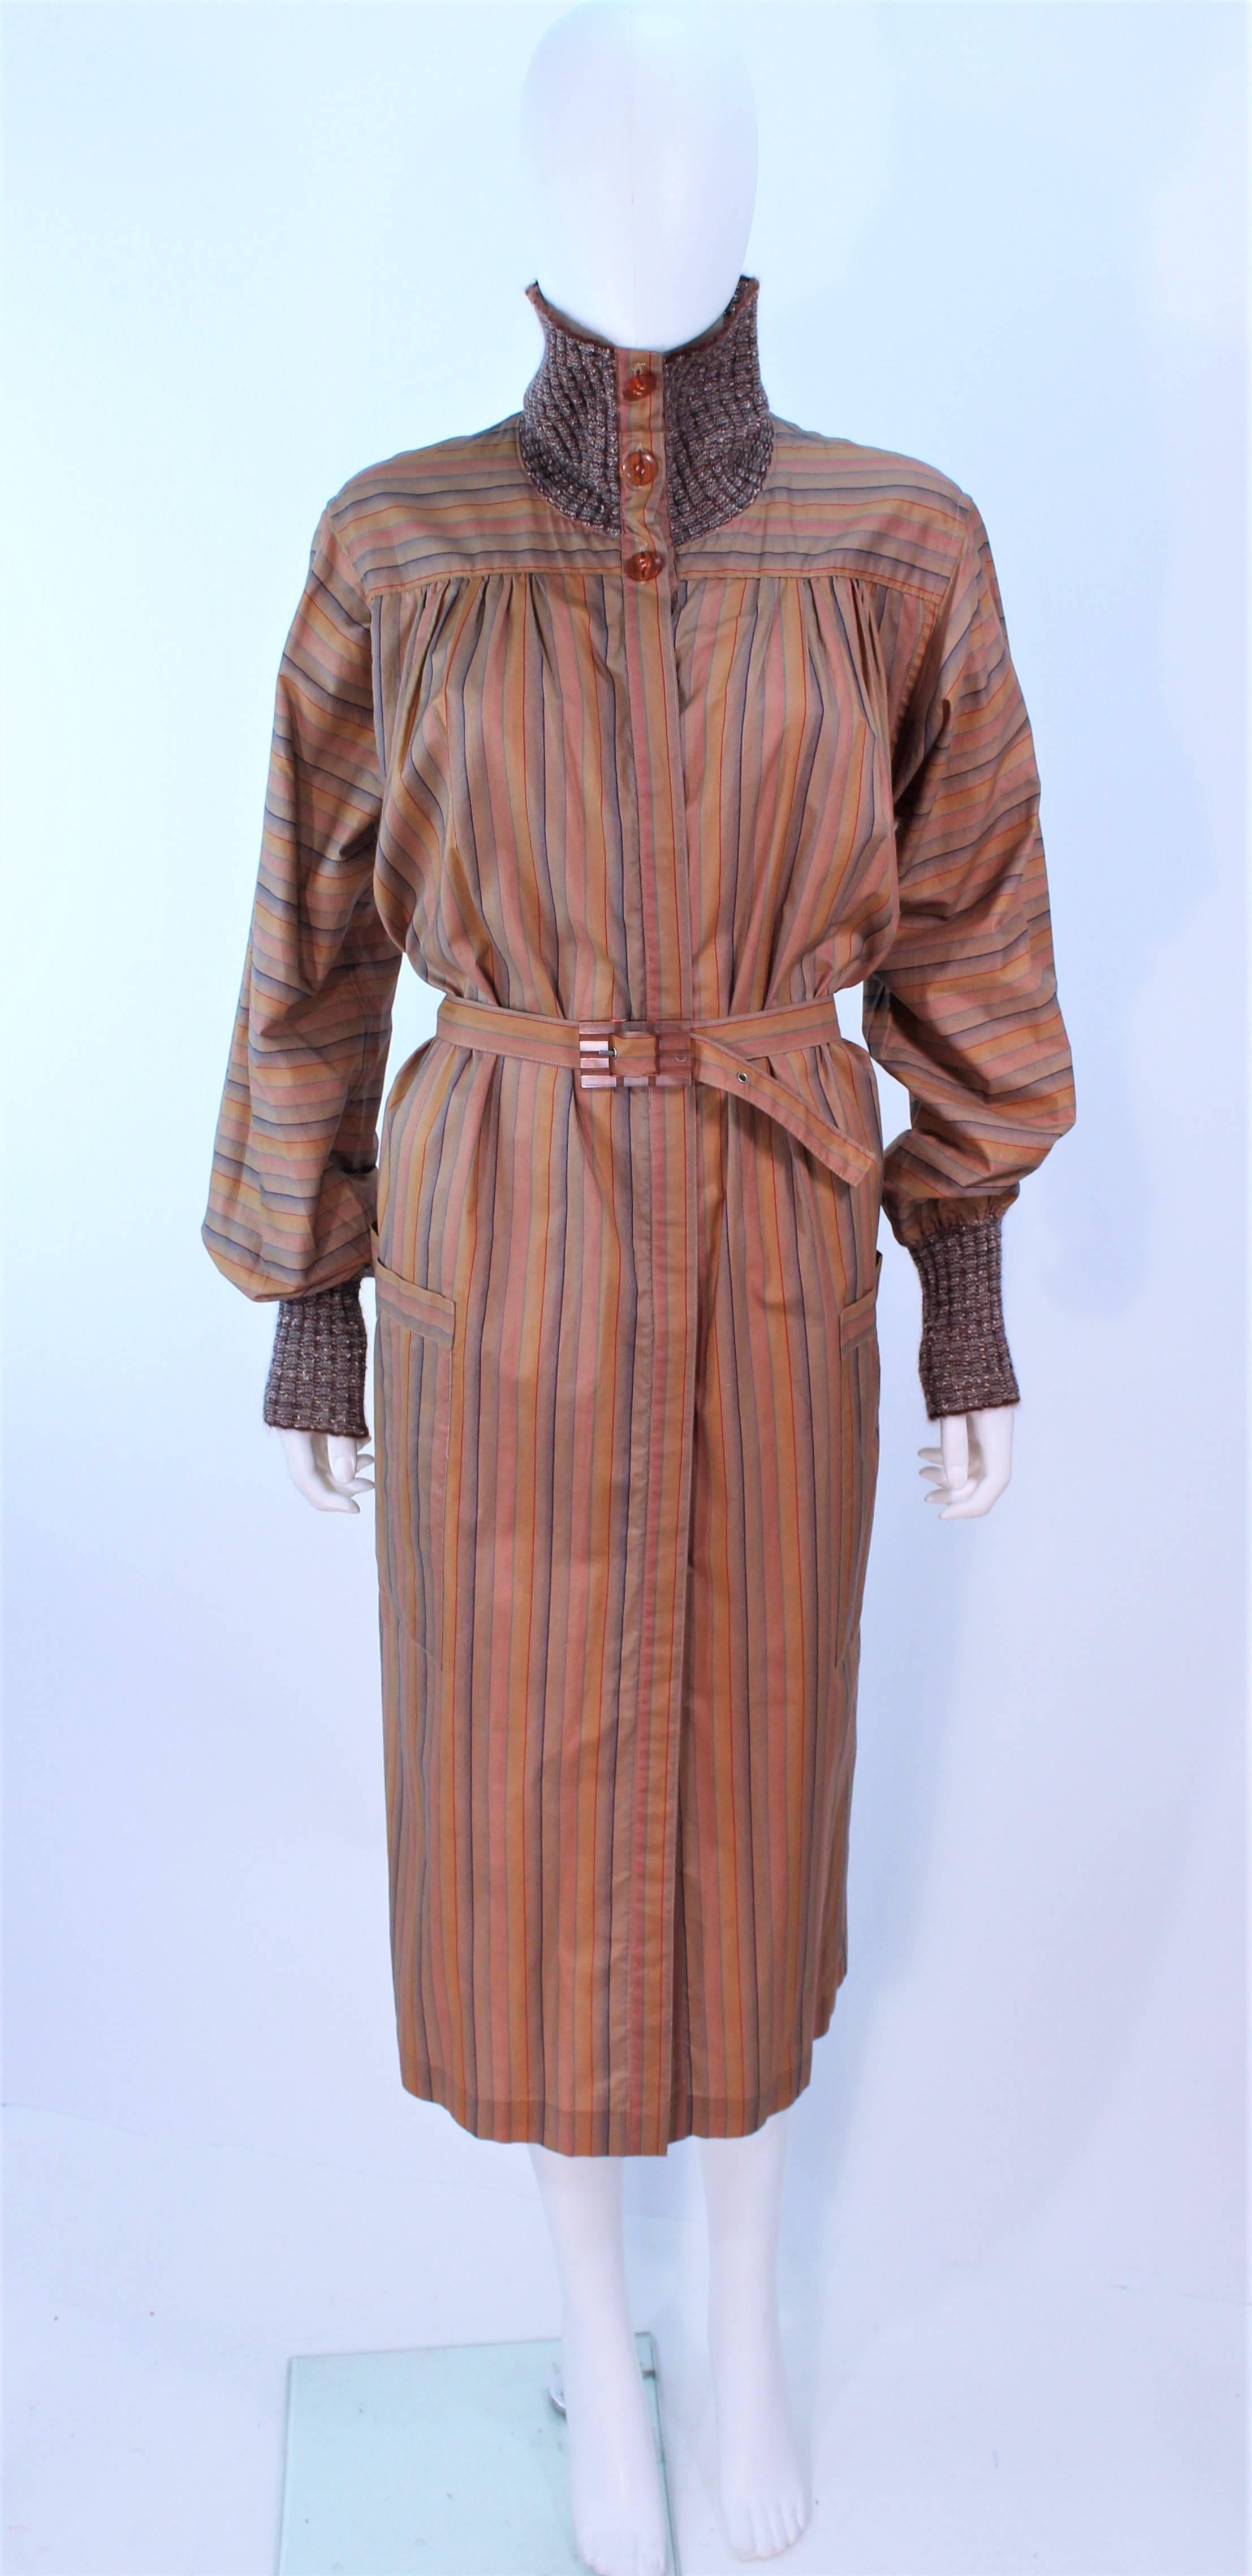 This Missoni design is composed of a striped khaki hue woven fabric with knit trim. Features center front button closures with a waist belt. There are side pockets. In great vintage condition, there is some staining on the front of the coat (see